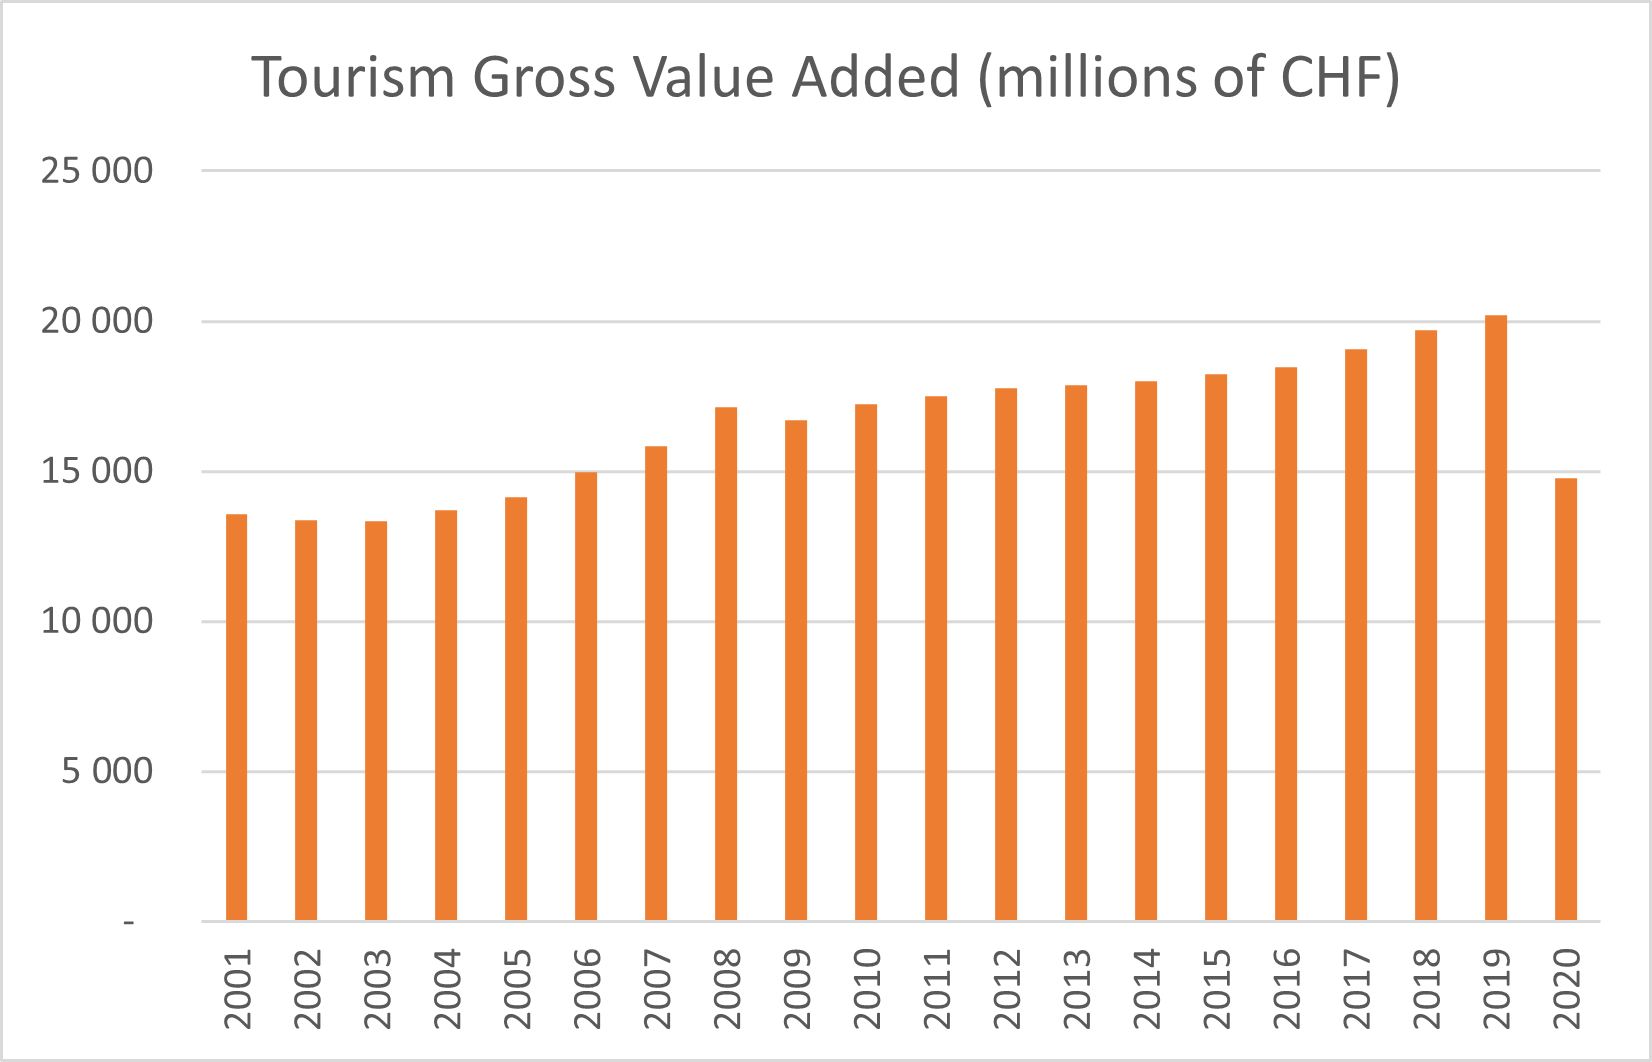 Table 1 - Tourism Gross Value Added (millions of CHF)